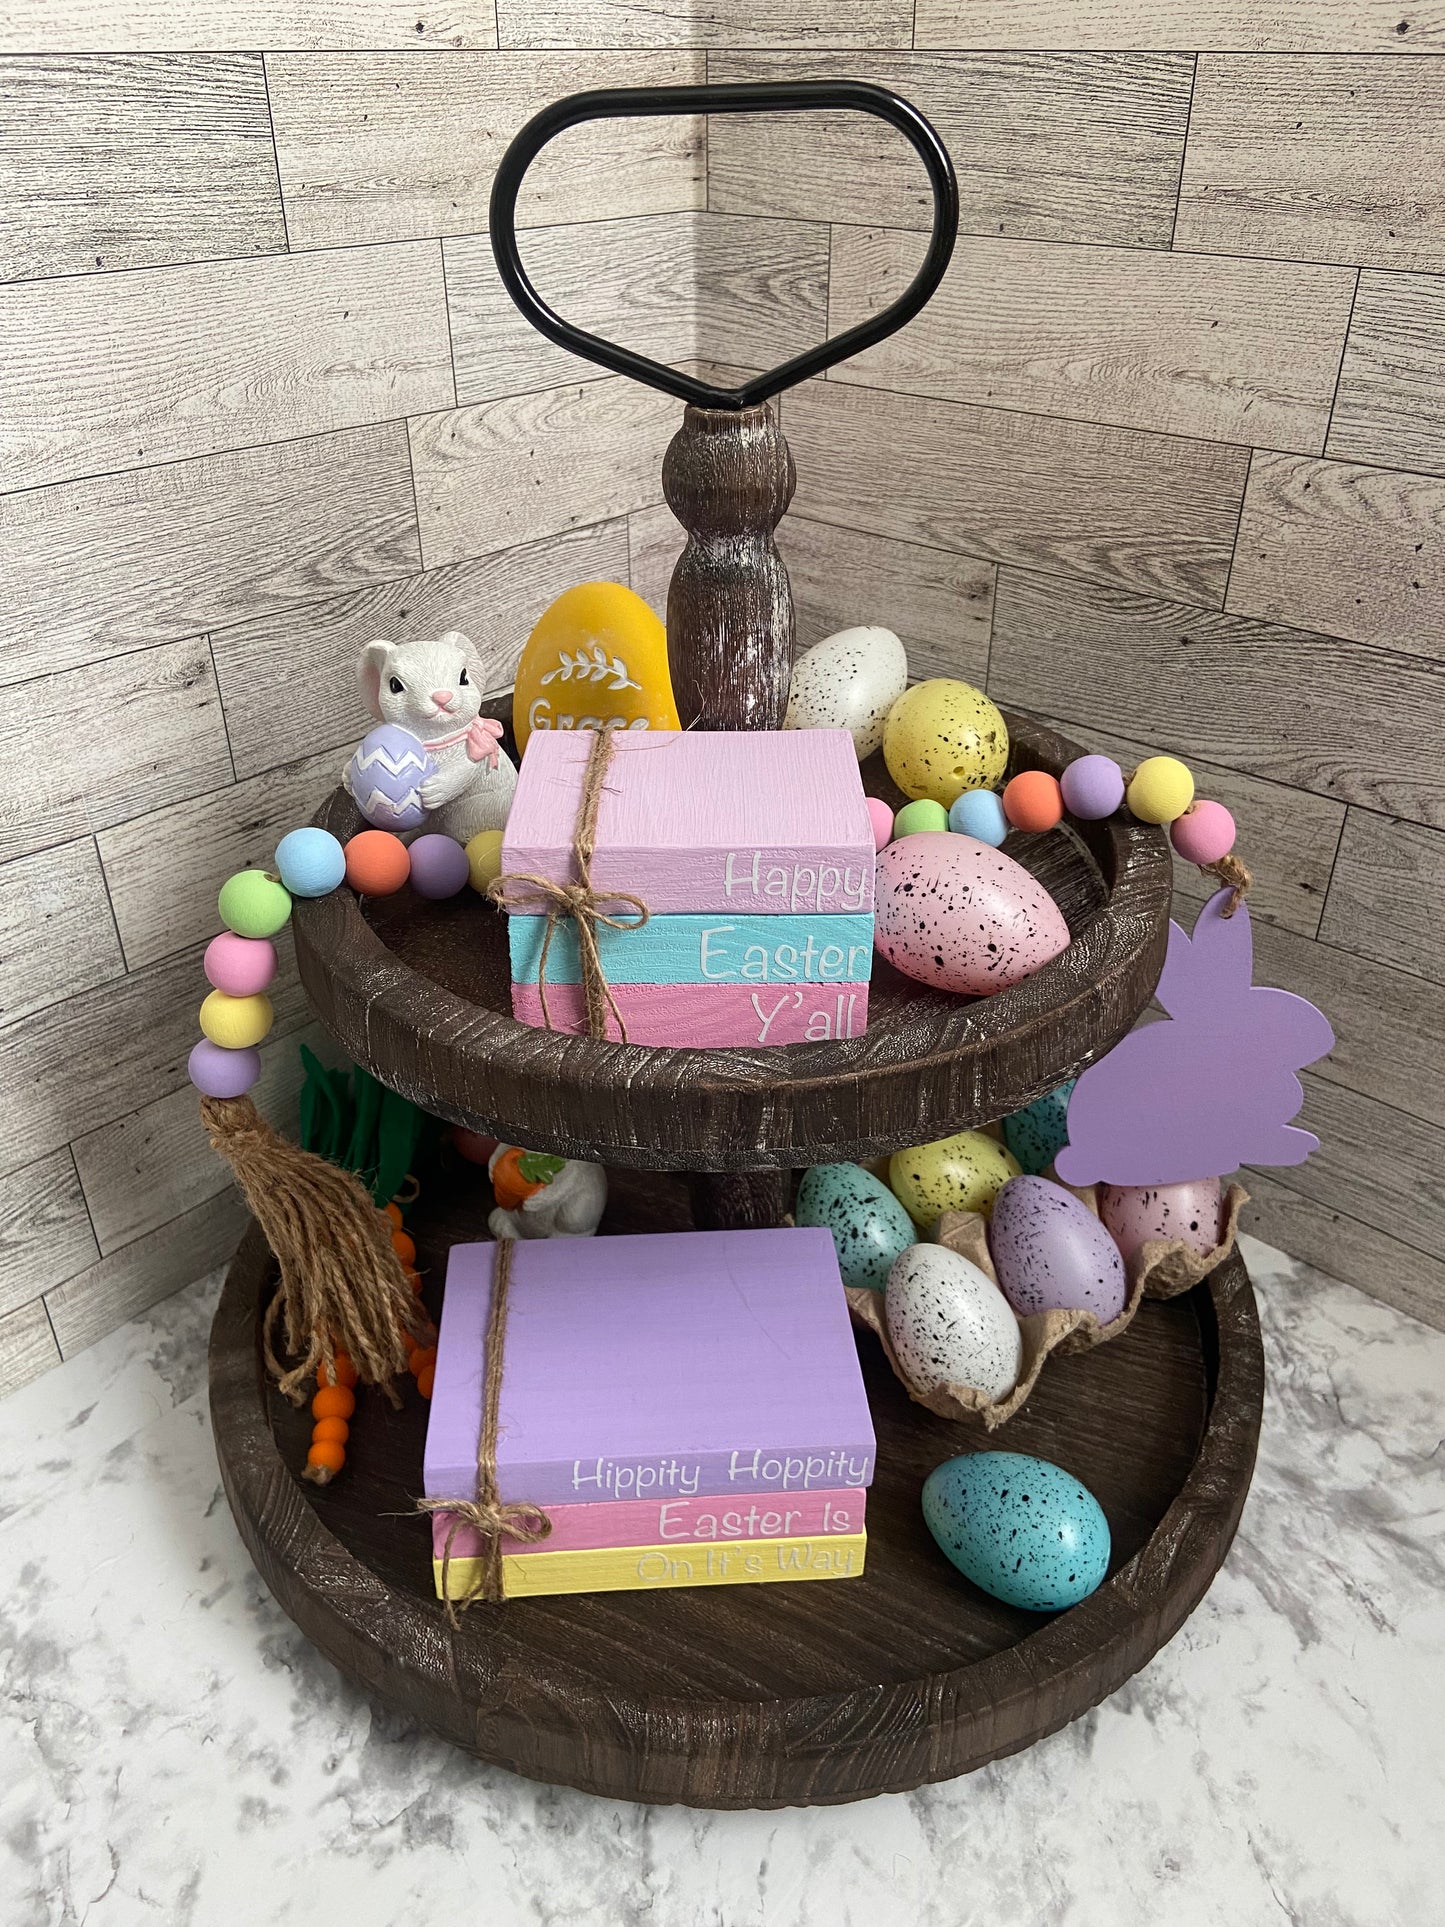 Hippity Hoppity Easter Is On Its Way - Large Book Stack